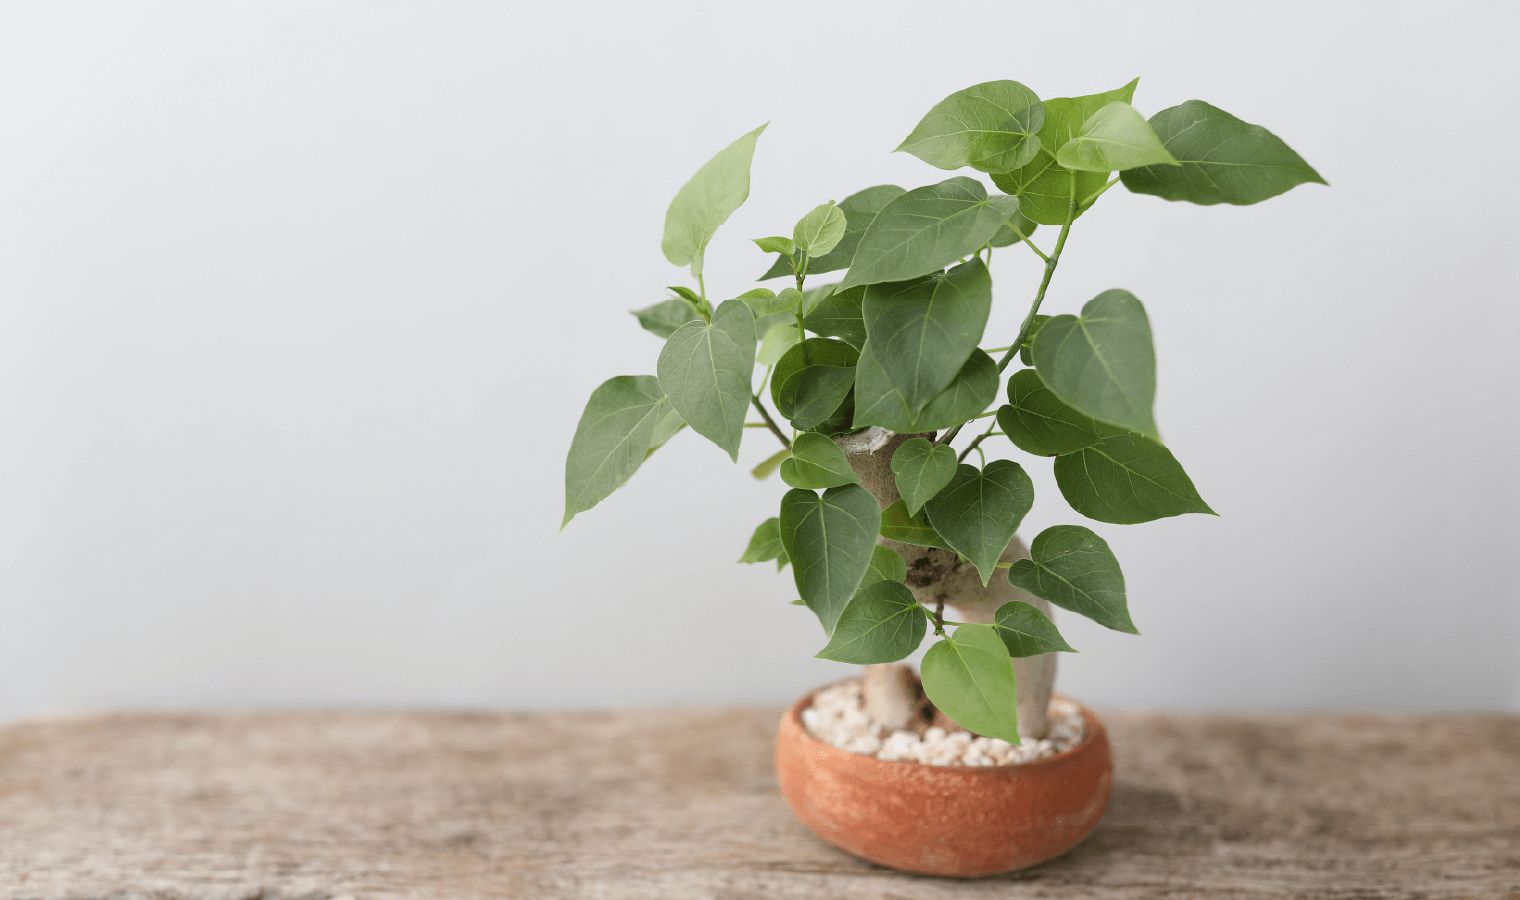 Image Of A Peepal Bonsai Which Is The Smaller Version Of A Standard Bonsai If You Can Imagine That A Smaller Version Exists